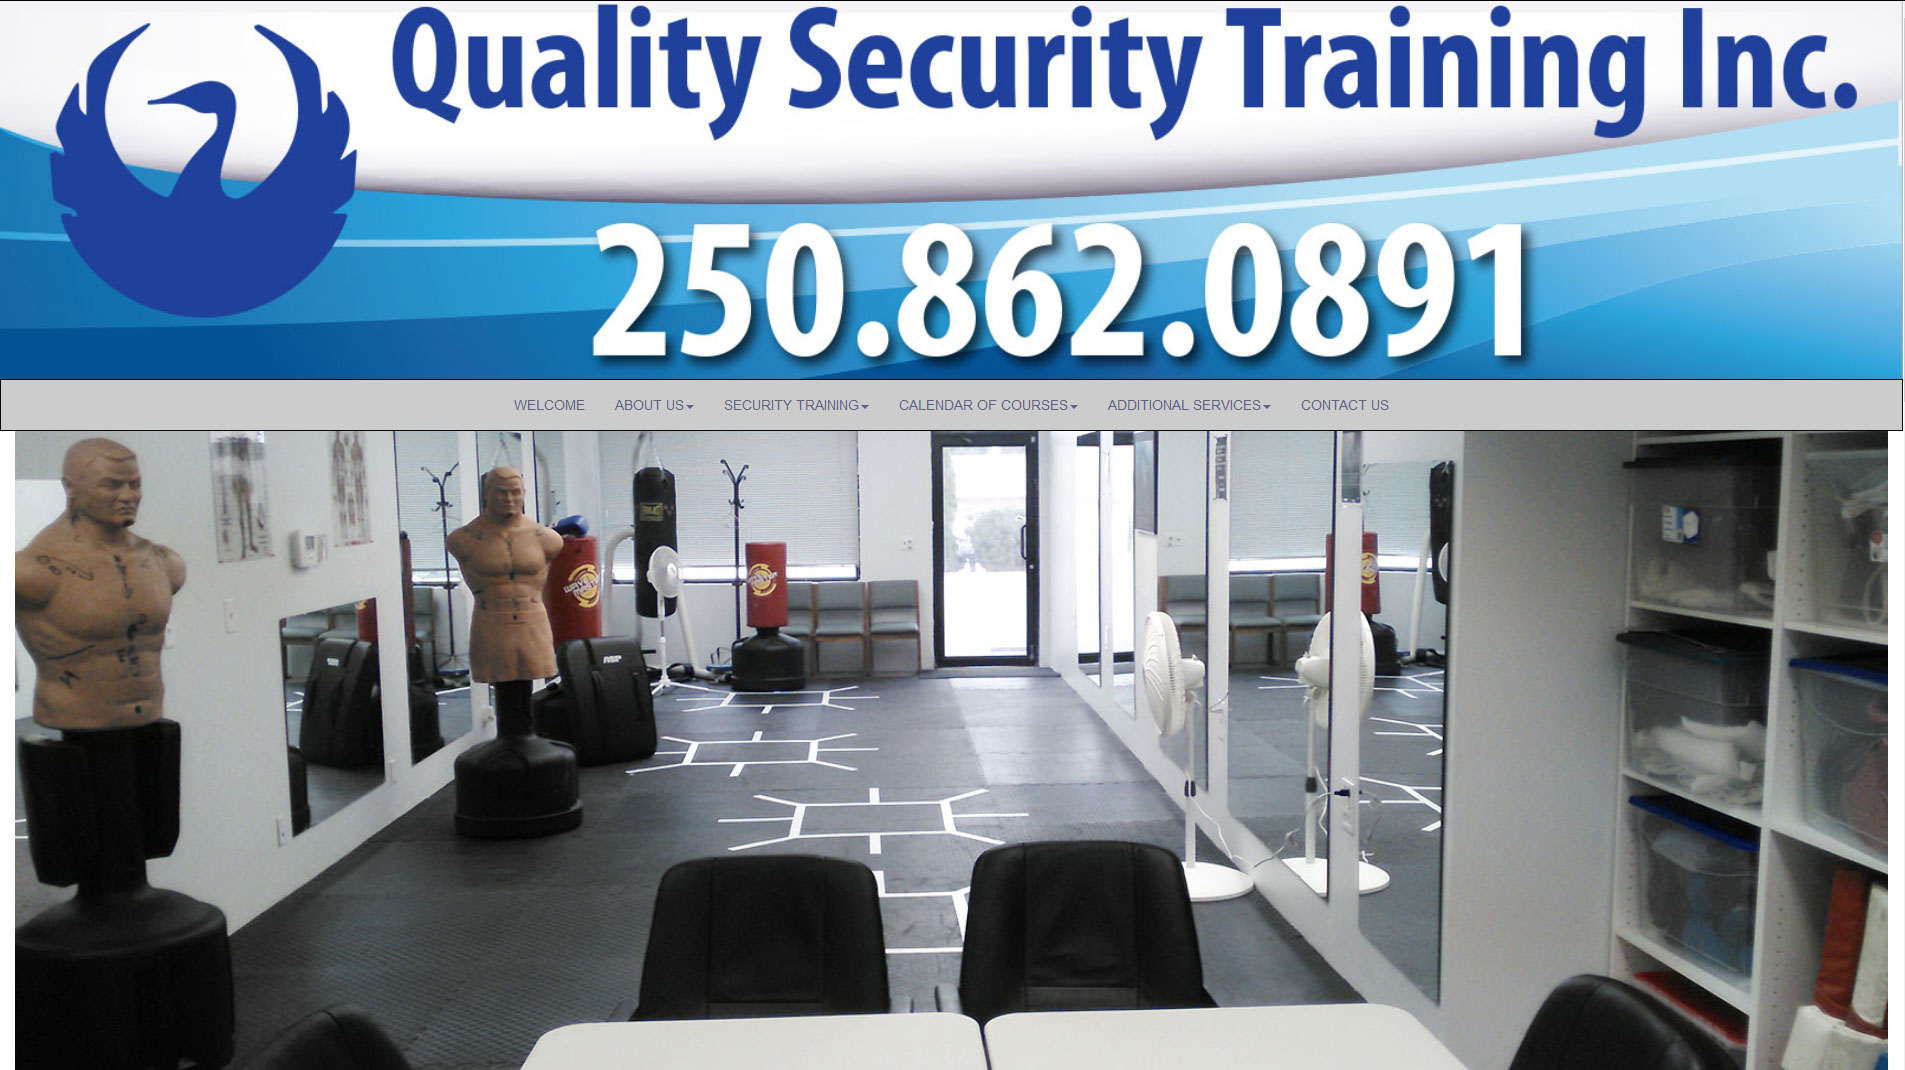 Frank McConnell offers security training and other services through Quality Security Training Inc.